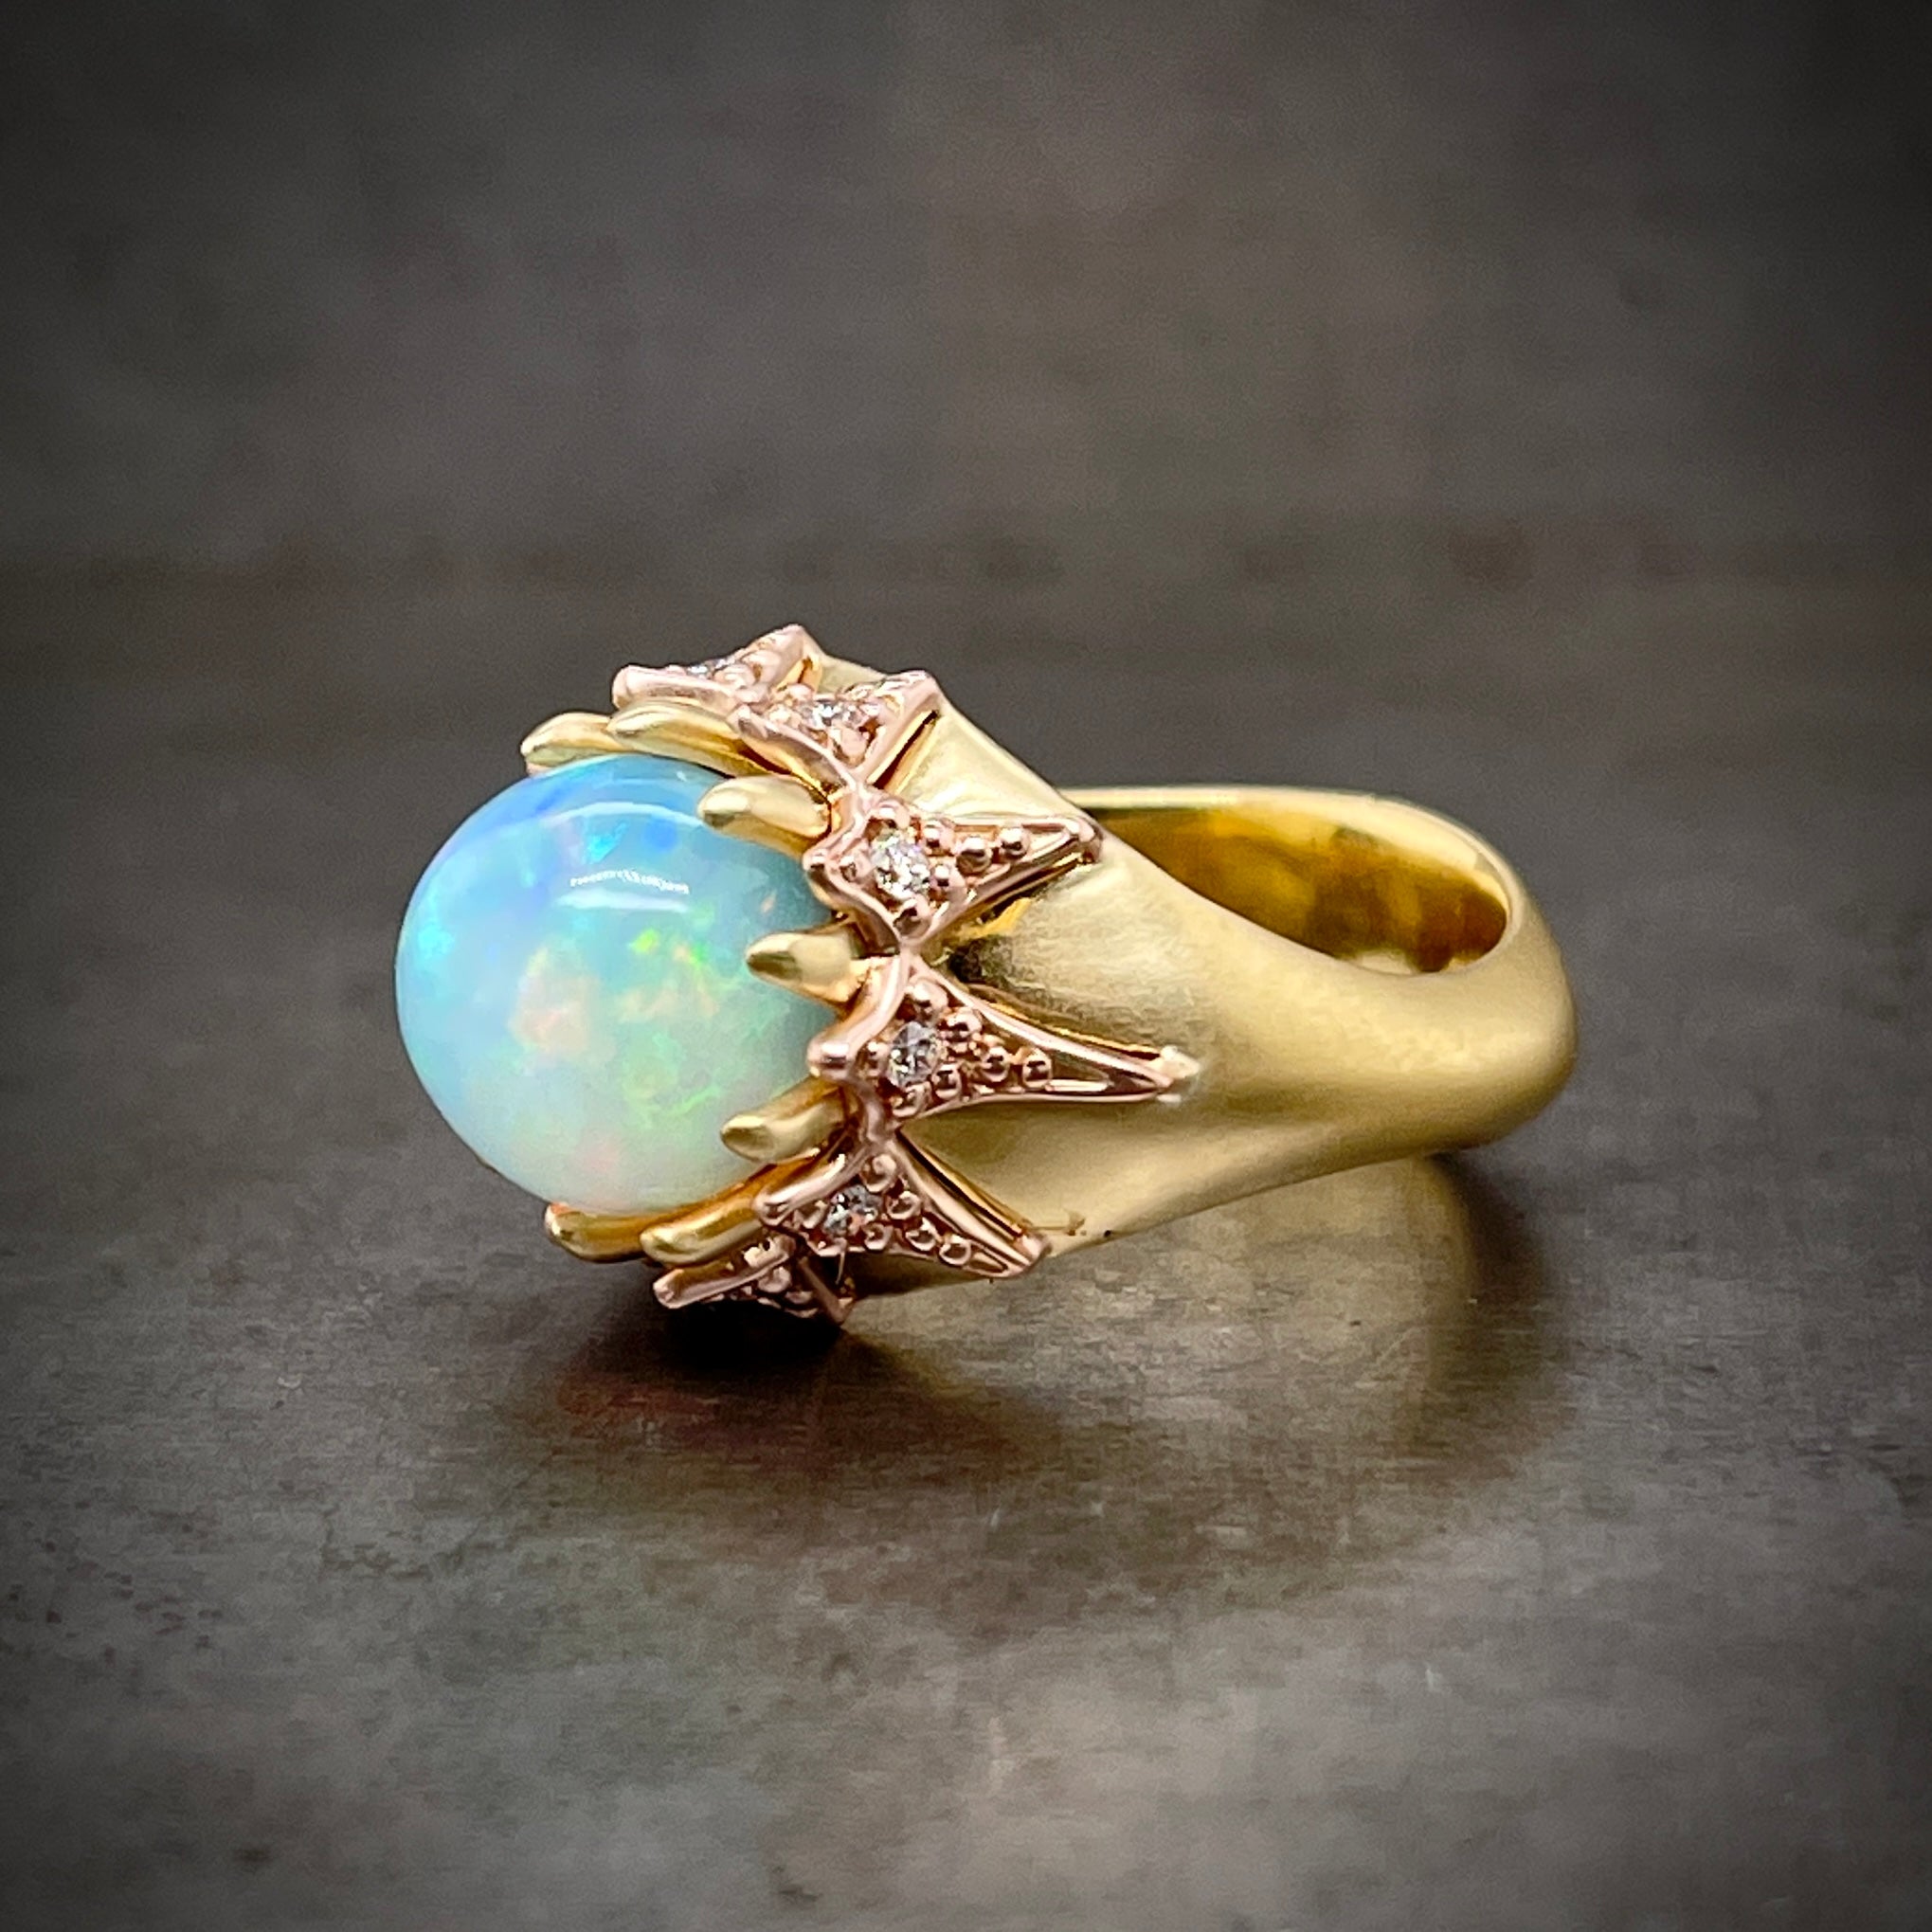 3/4 profile of opal and diamond gold ring.